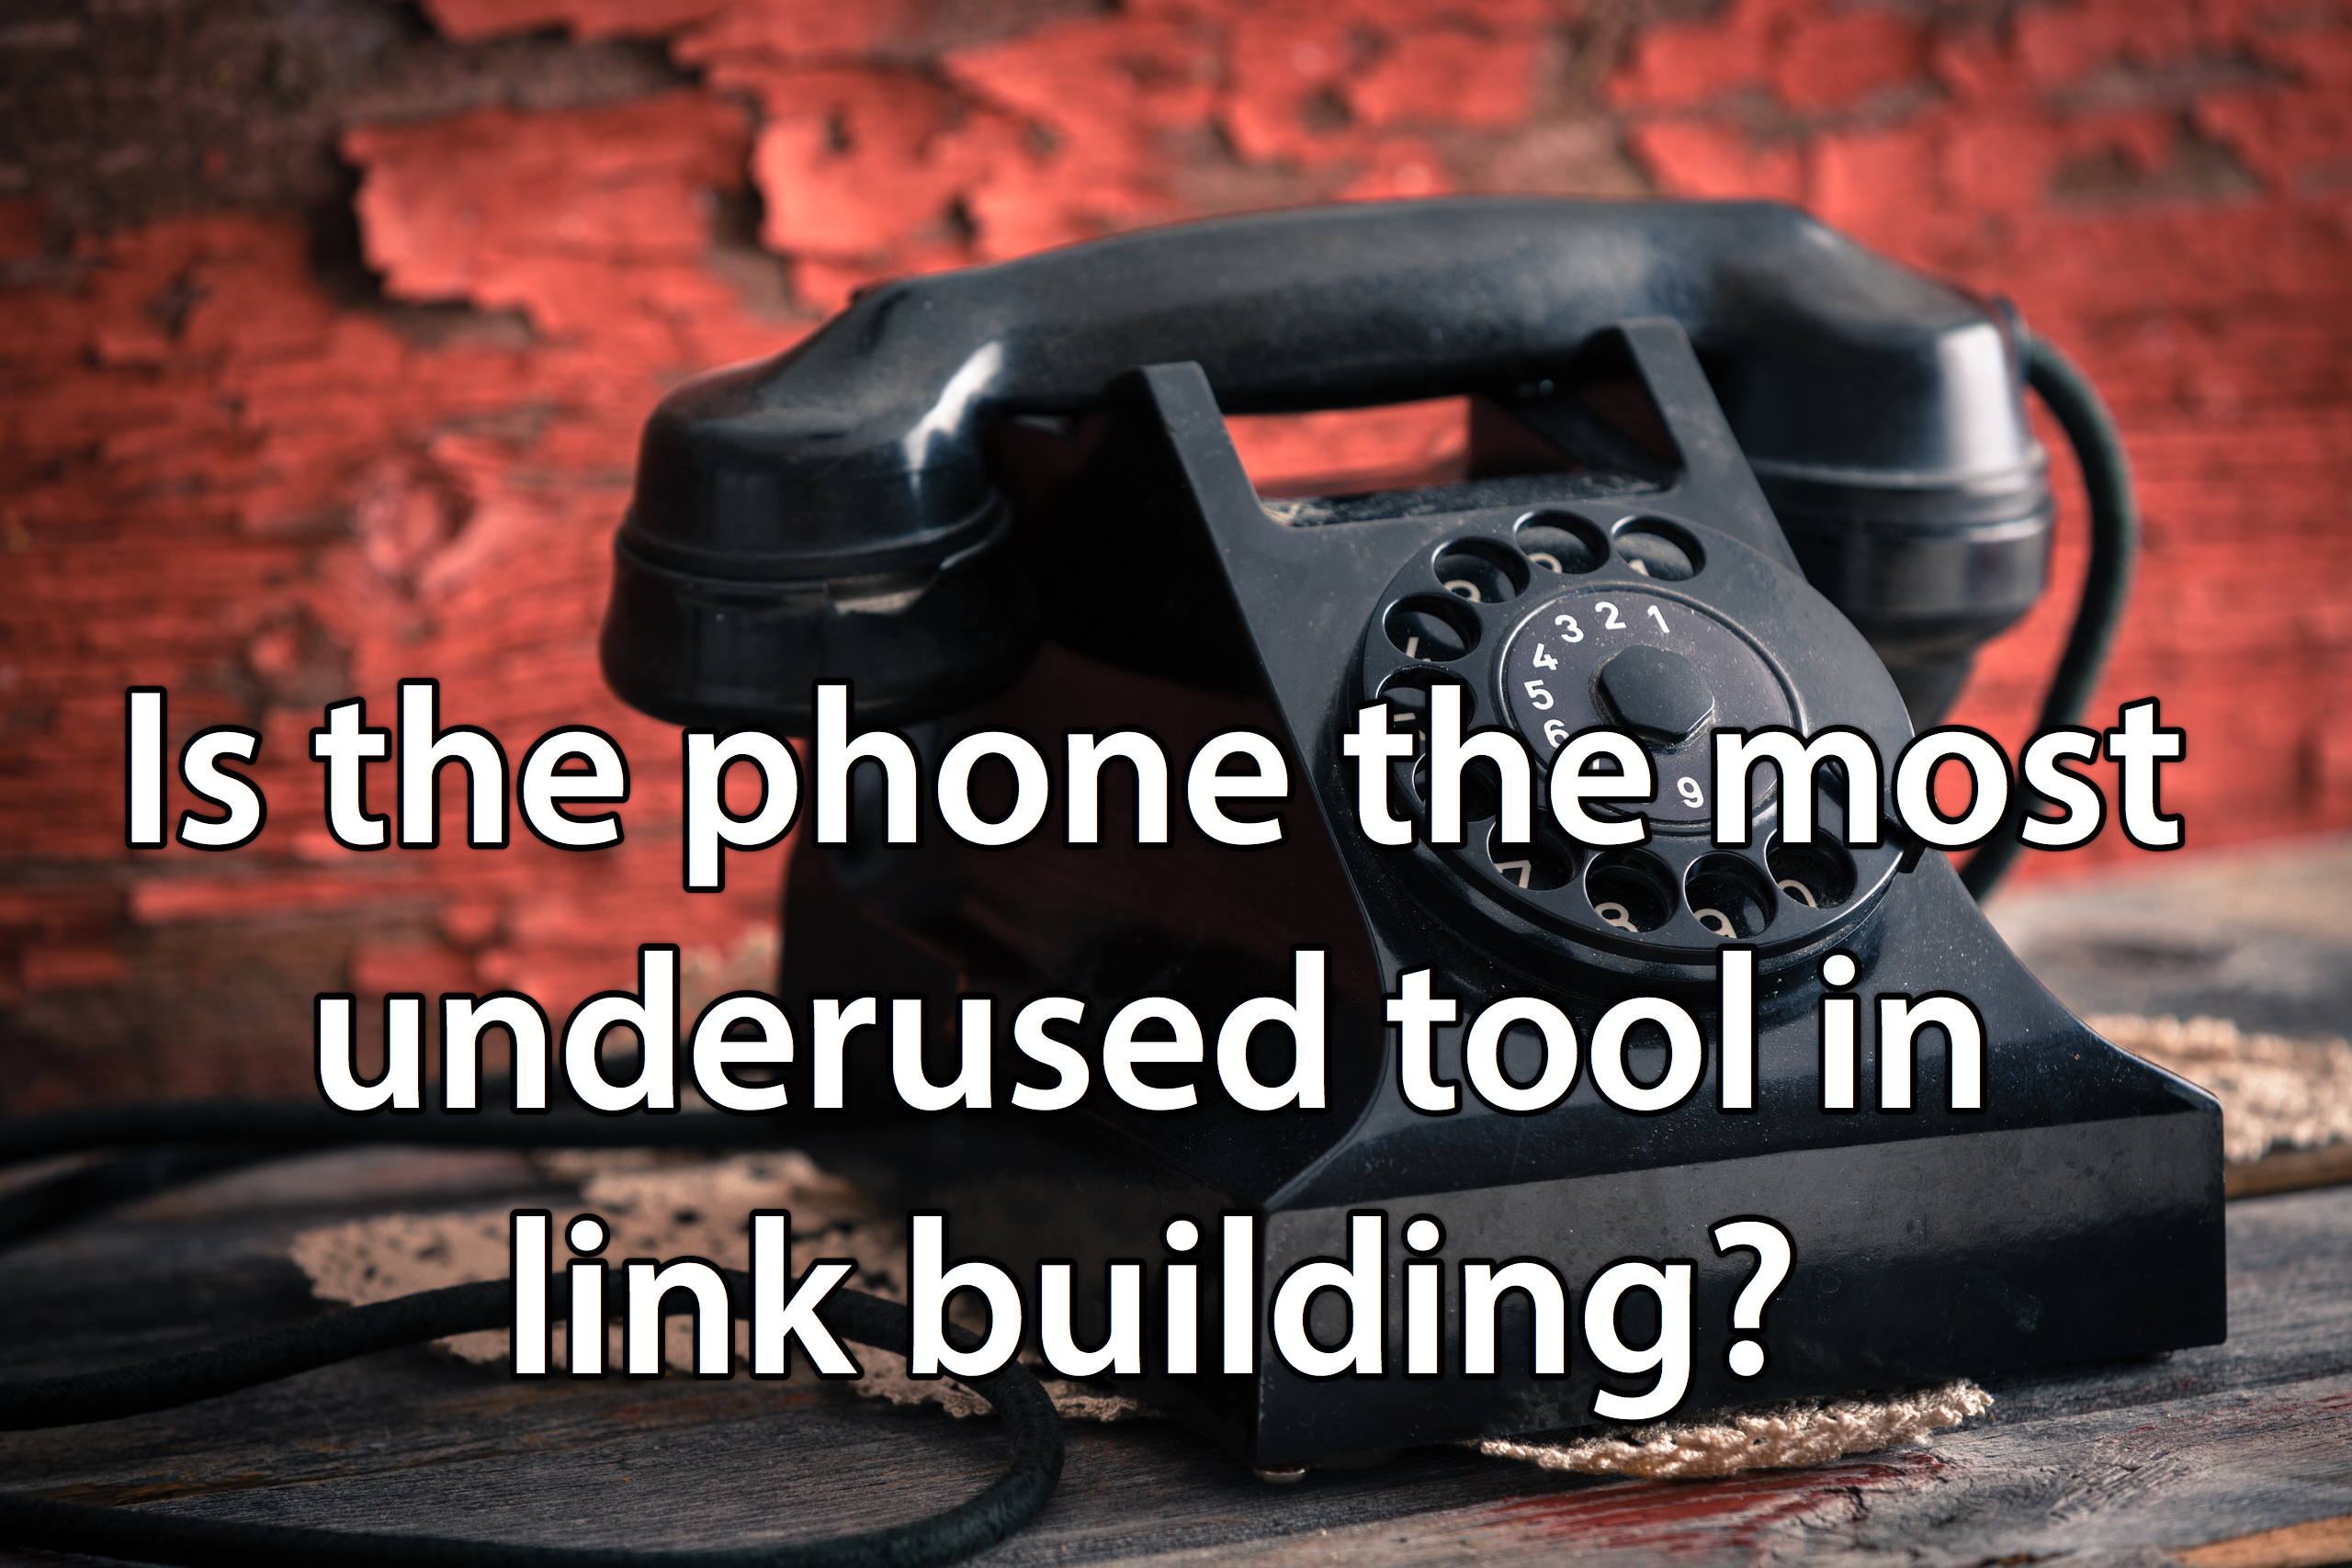 Is the phone the most underused tool in link building?